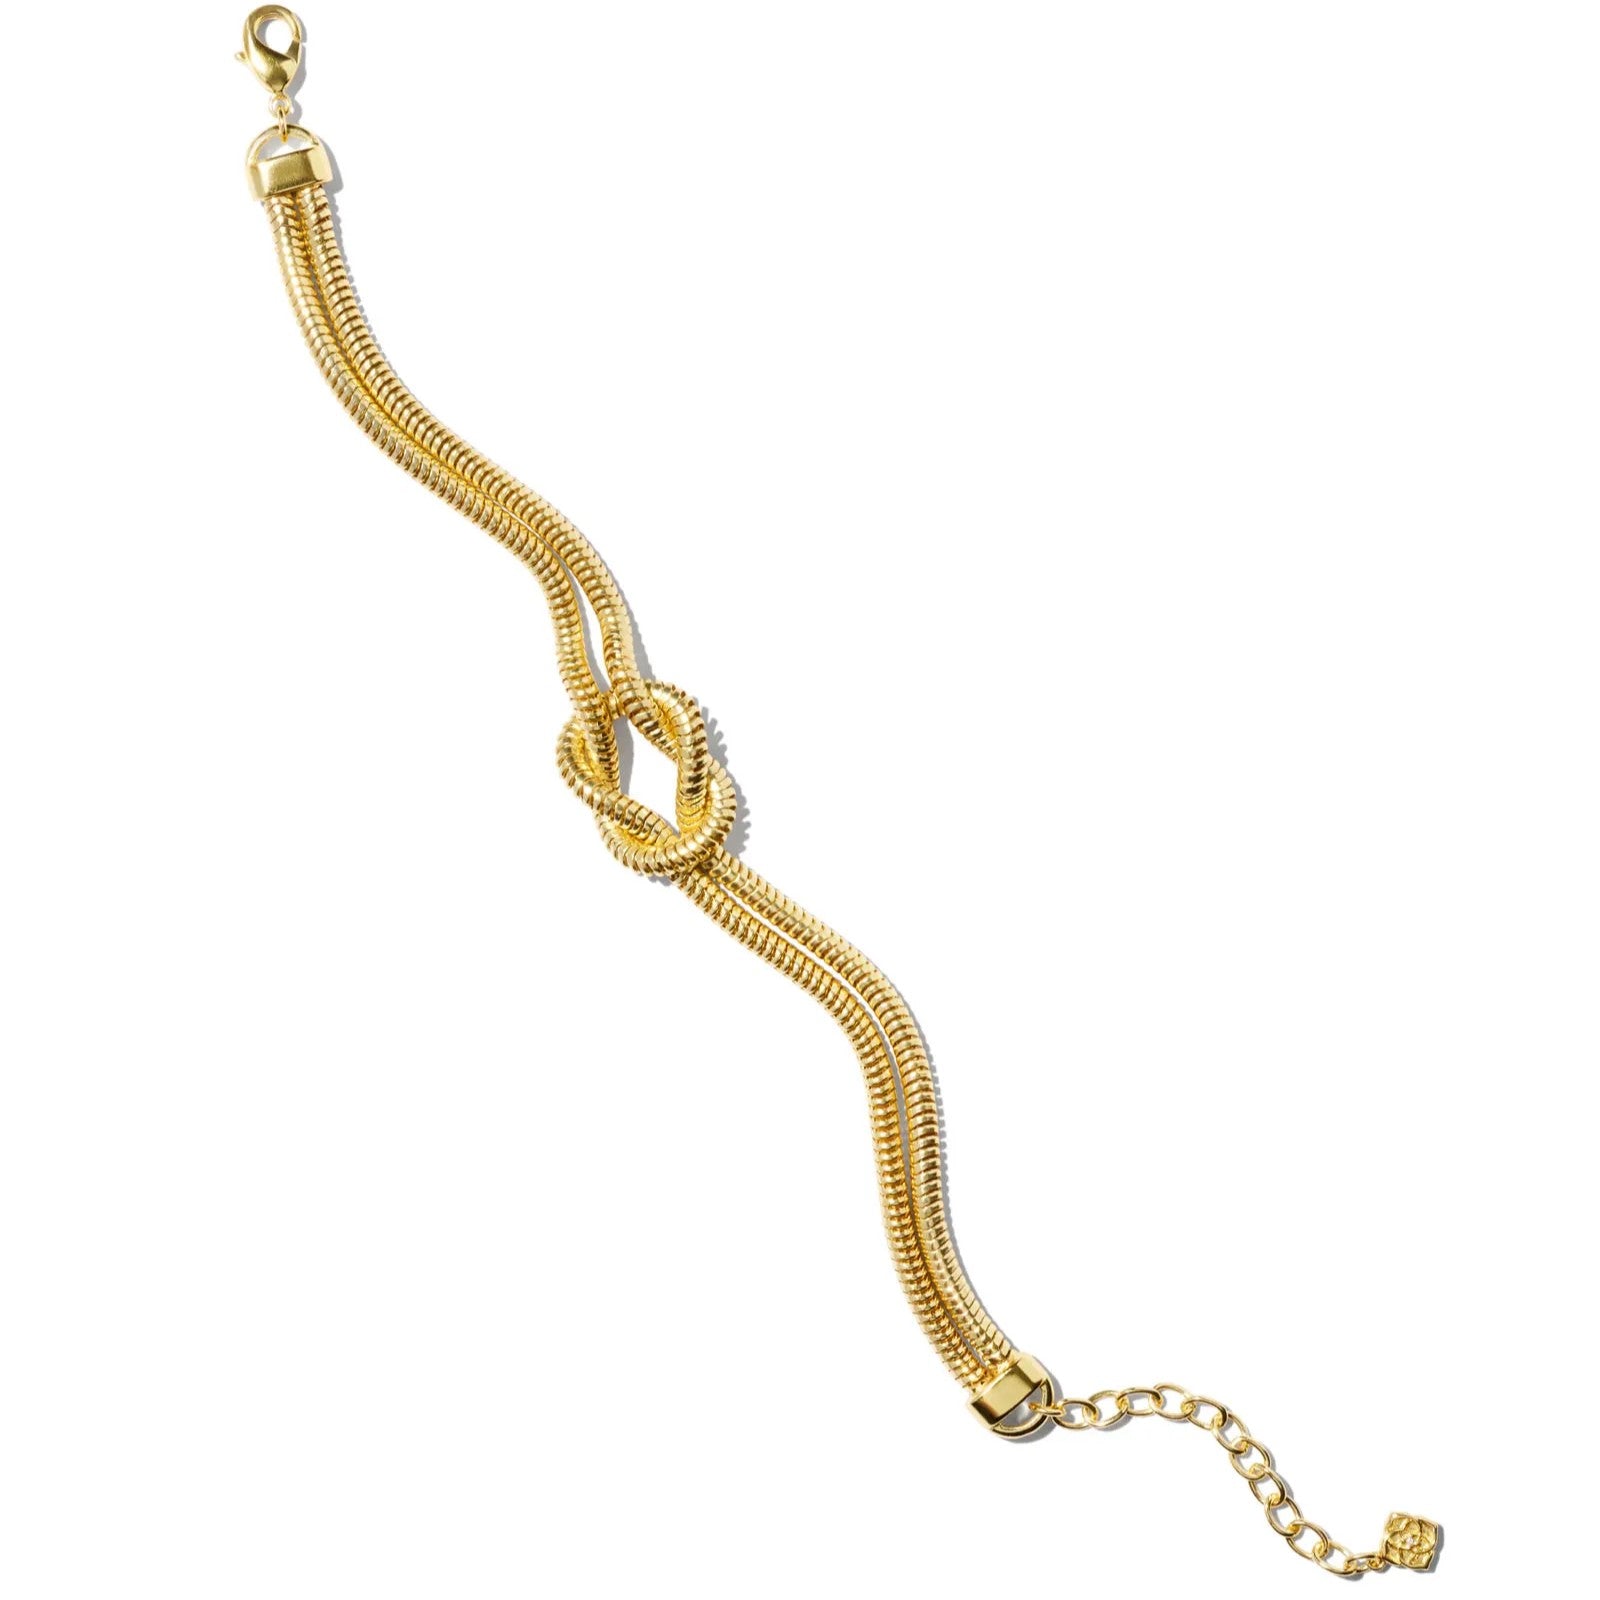 Kendra Scott | Annie Chain Bracelet in Gold - Giddy Up Glamour Boutique